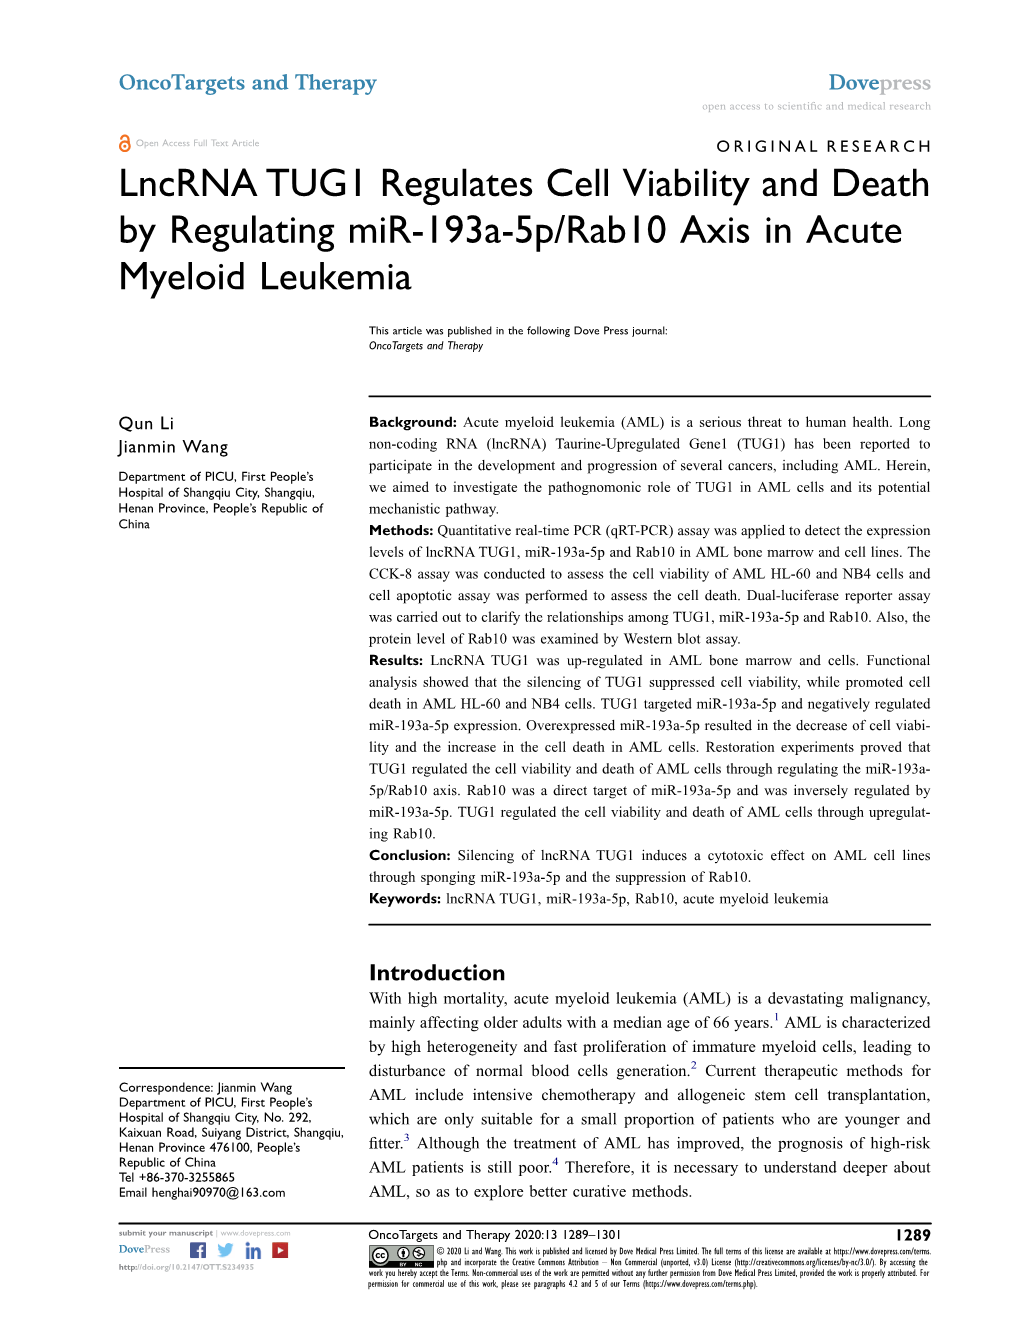 Lncrna TUG1 Regulates Cell Viability and Death by Regulating Mir-193A-5P/Rab10 Axis in Acute Myeloid Leukemia